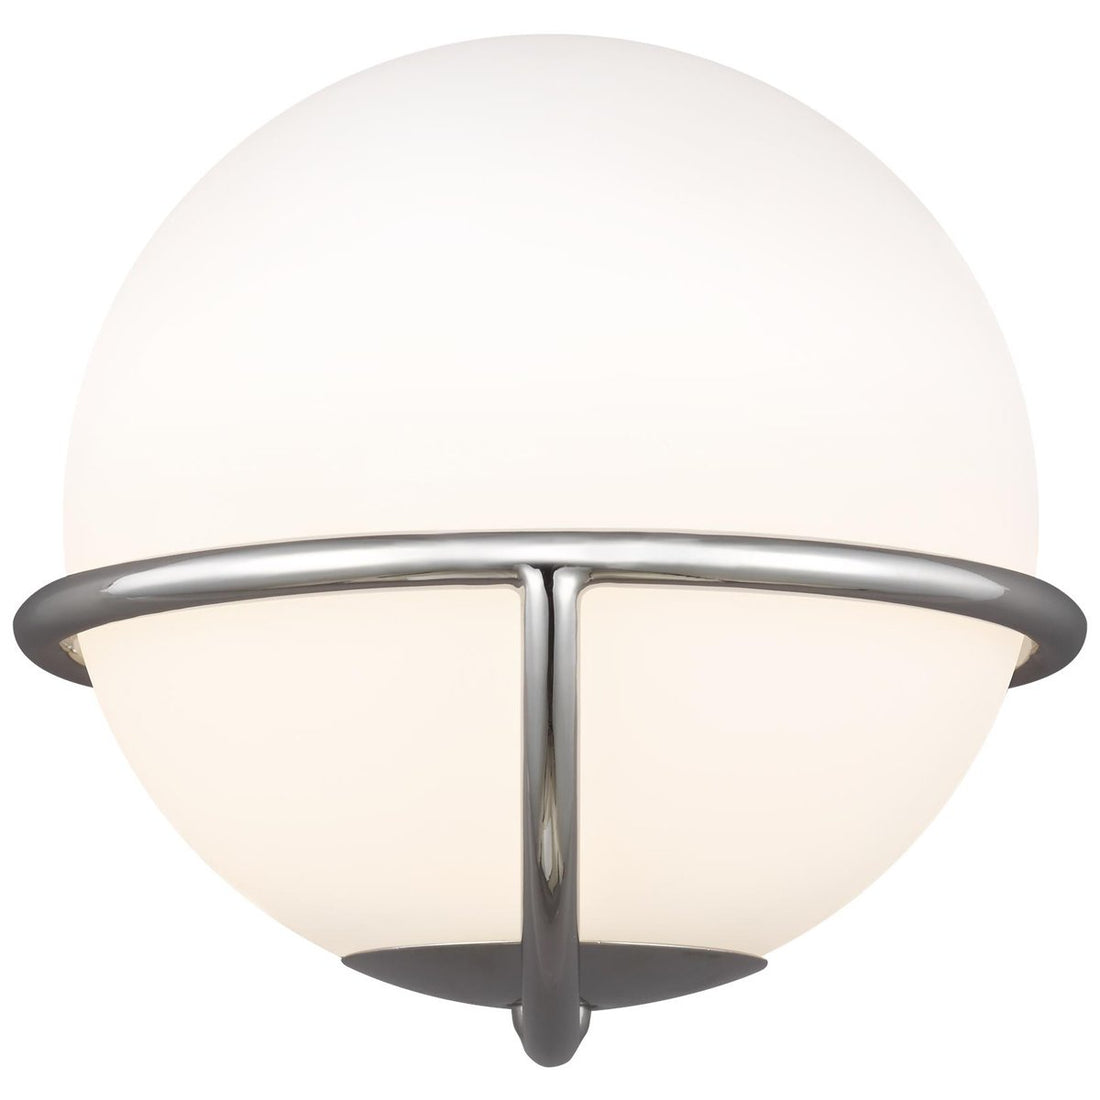 Feiss Apollo 1-Light Wall Sconce